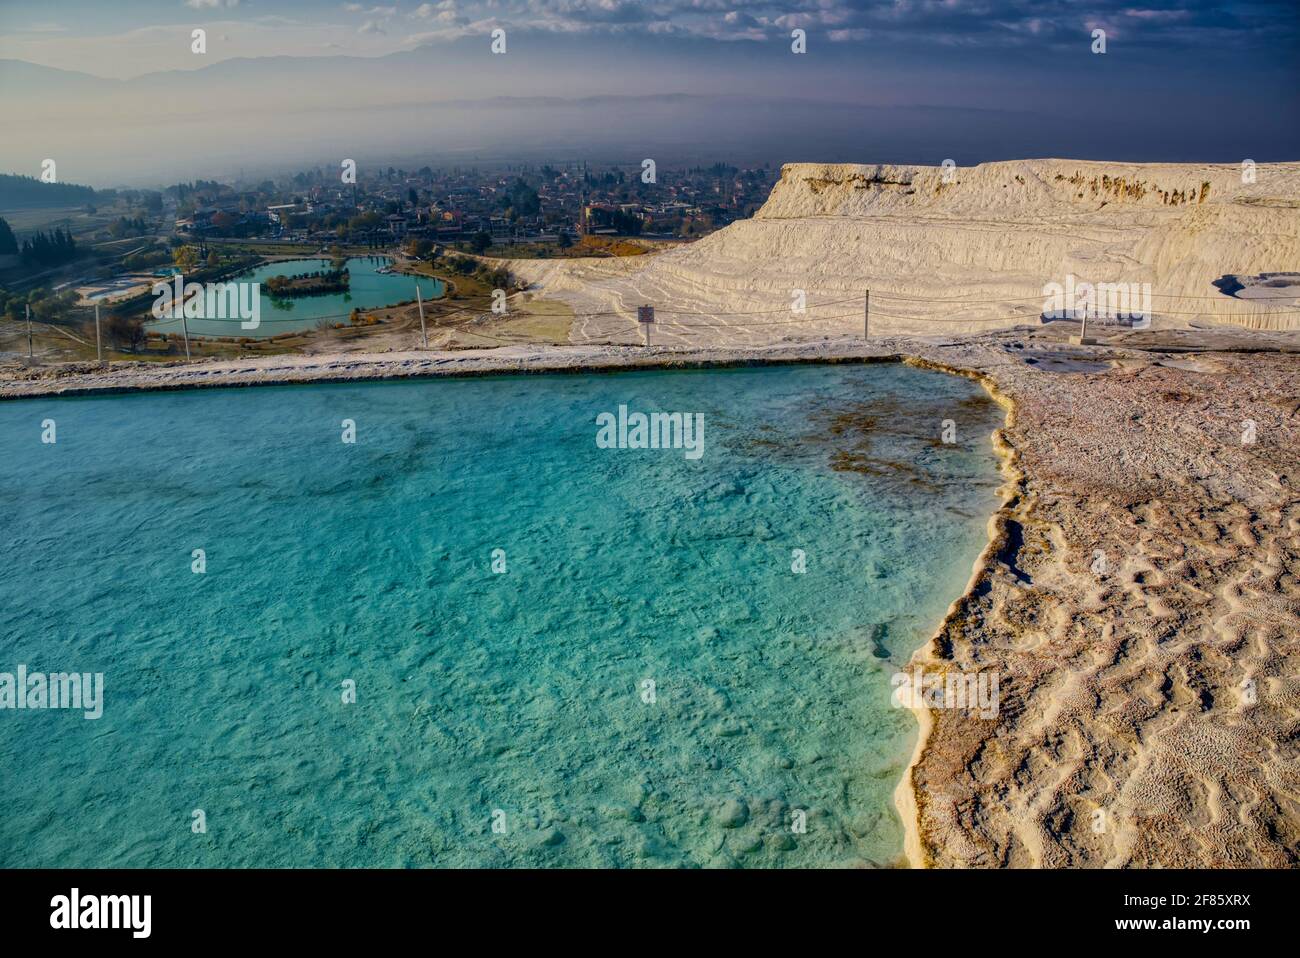 Calcite-laden waters from hot springs, emerging from a cliff almost 200 metres high overlooking the plain, have created a visually stunning landscape Stock Photo